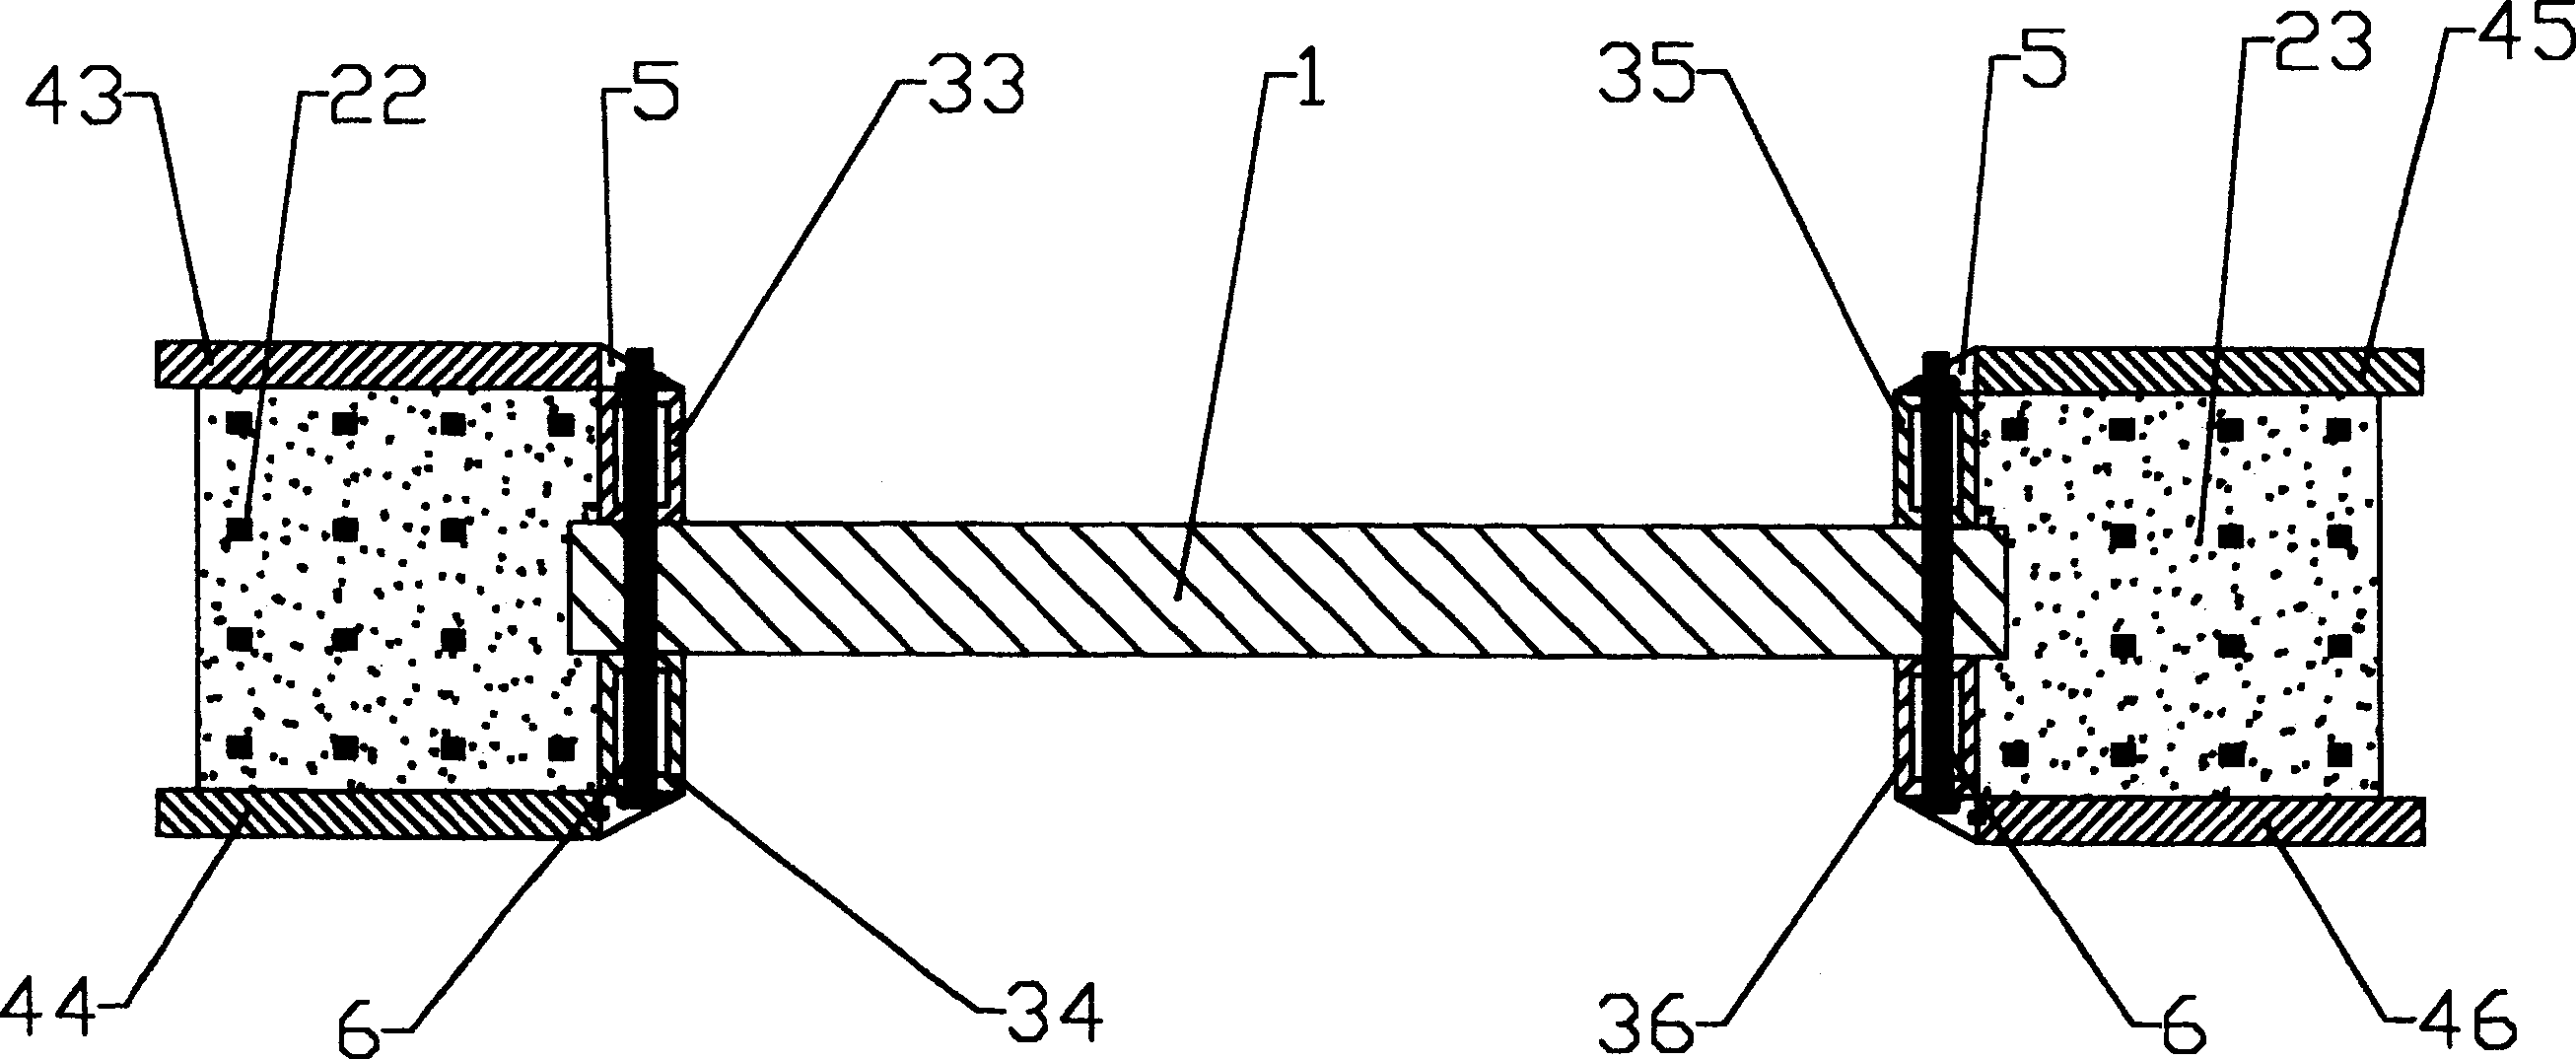 Method for pouring and assembling light wallboard